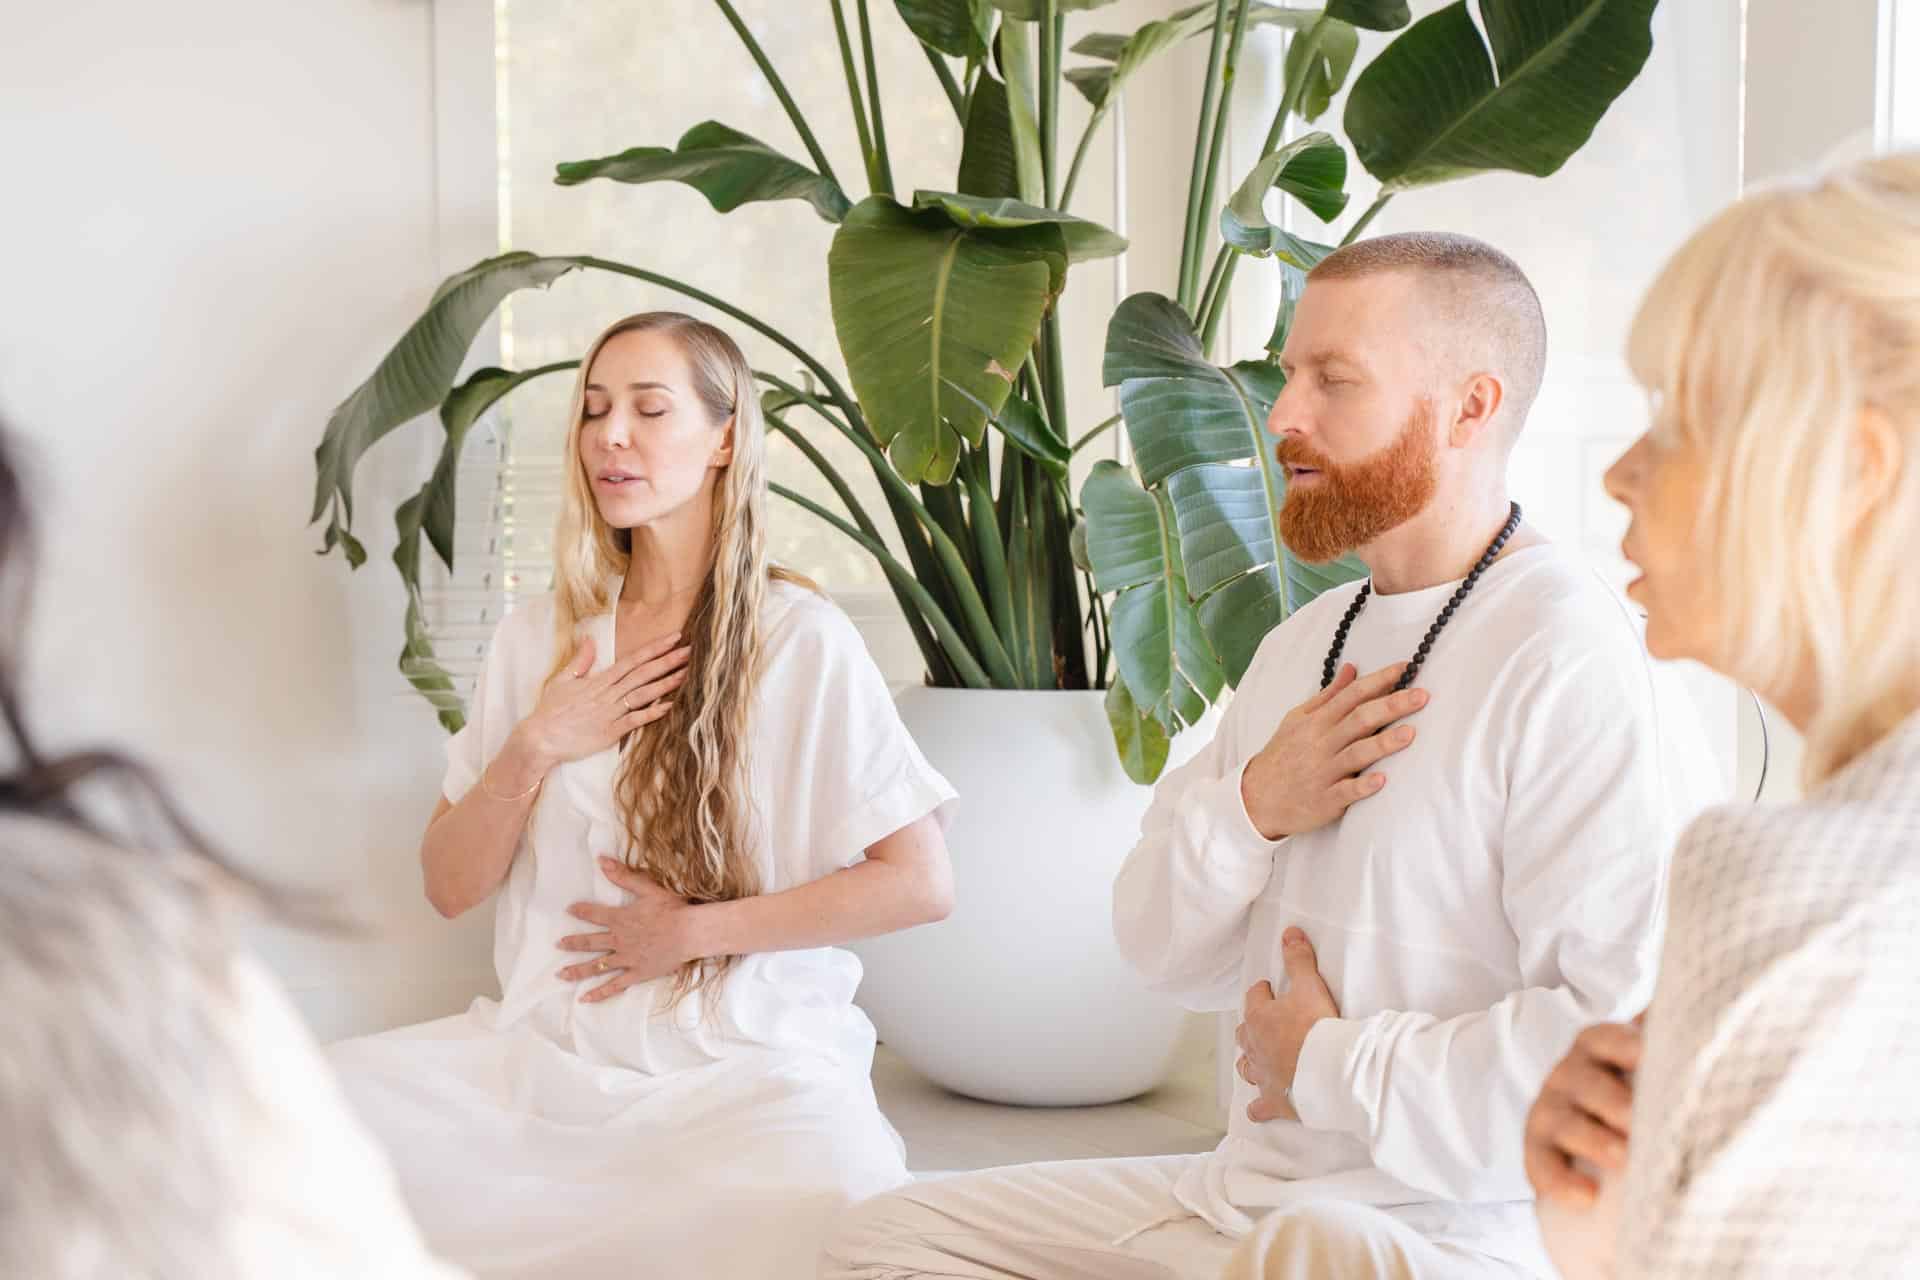 Steve and Austin leading a meditation at a 5-meO-DMT retreat